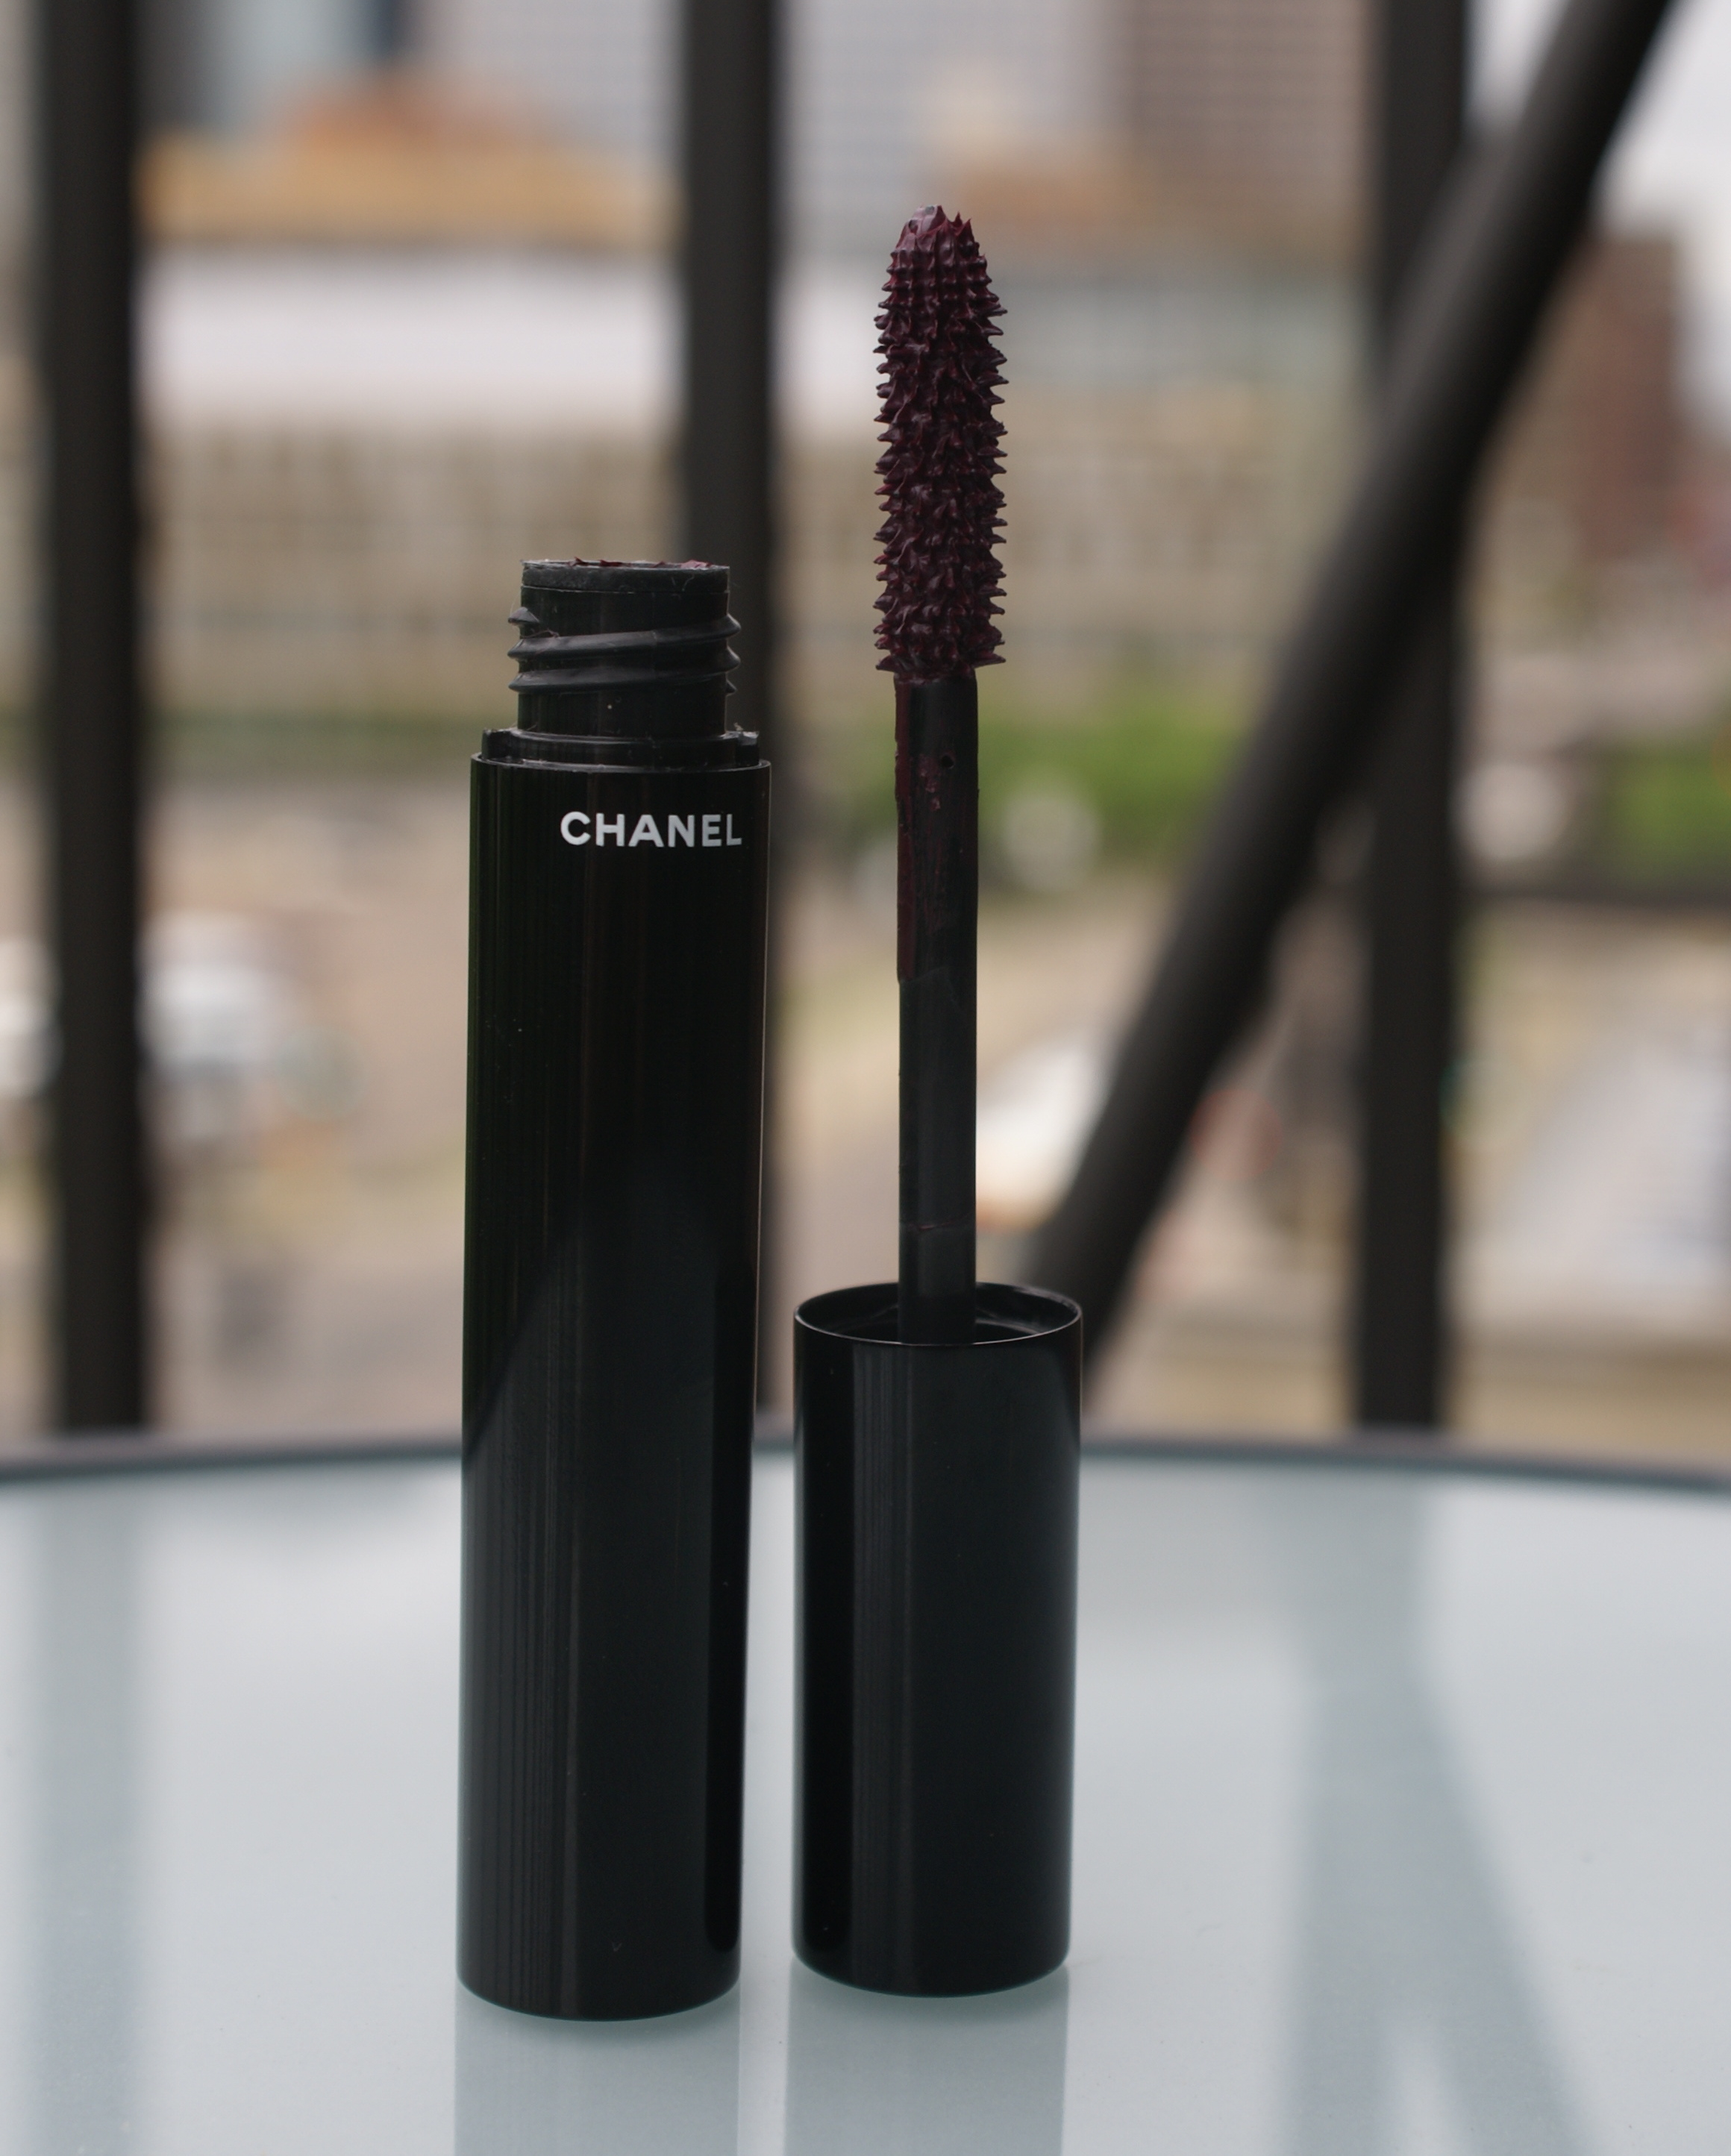 Le Volume De Chanel Mascara: Worth it? – The Other End of the Brush